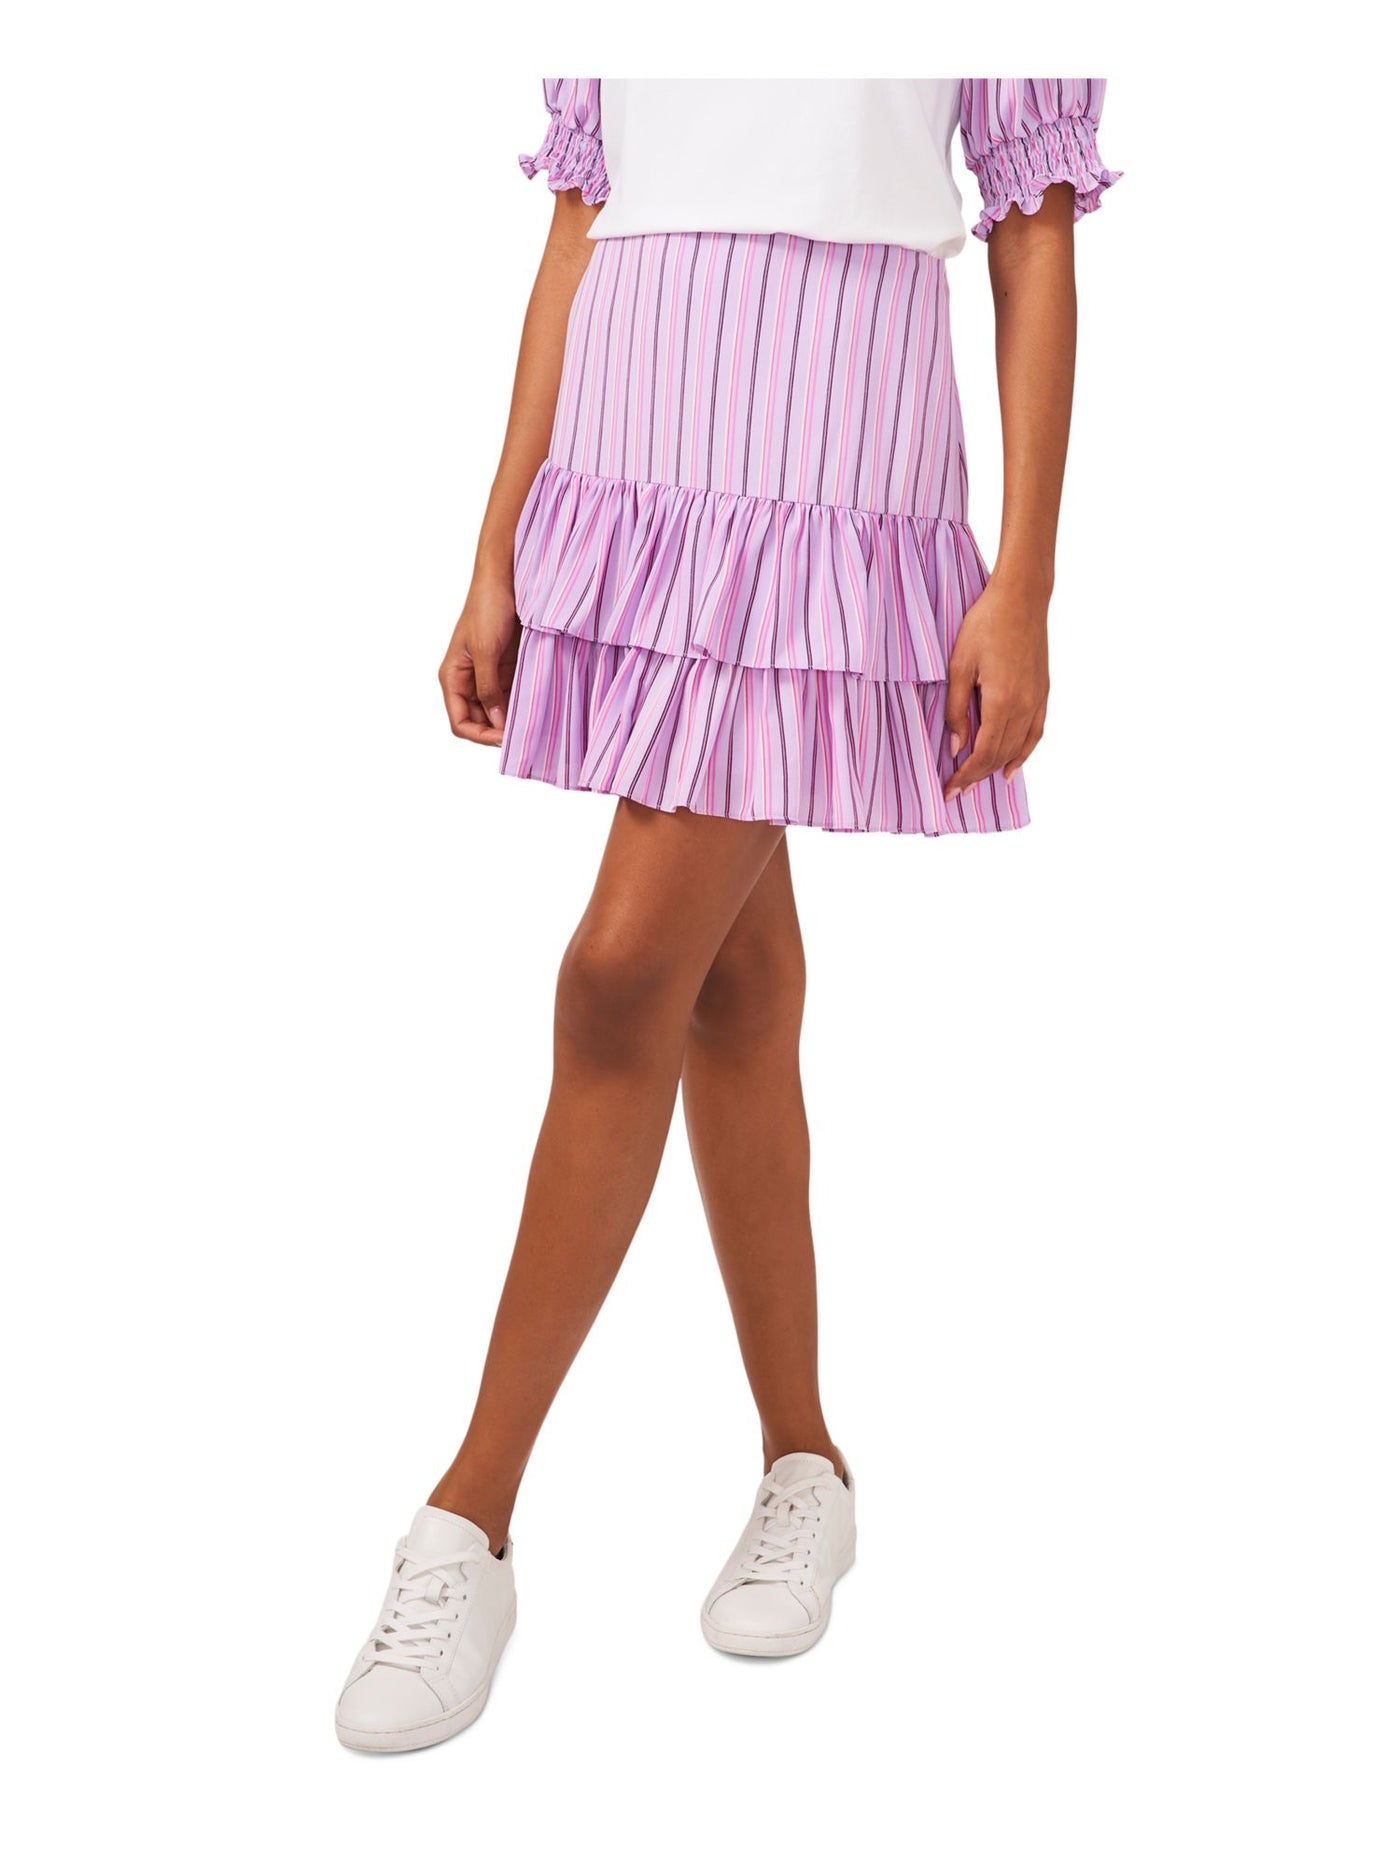 RILEY&RAE Womens Purple Smocked Lined Pull On Striped Short Ruffled Skirt L